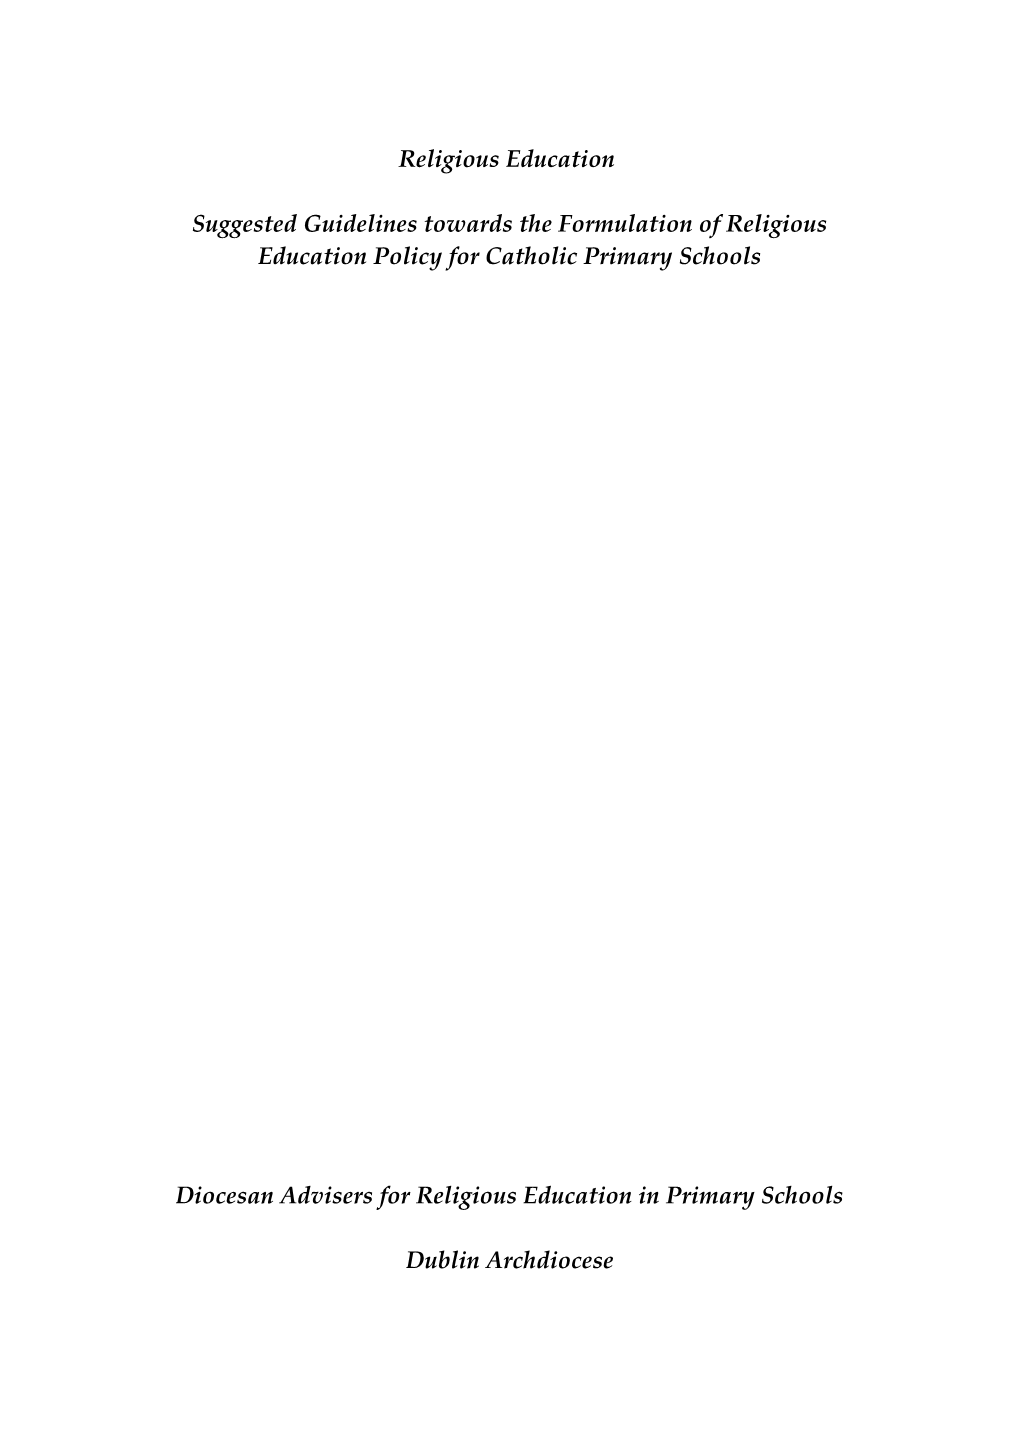 Diocesan Advisers for Religious Education in Primary Schools